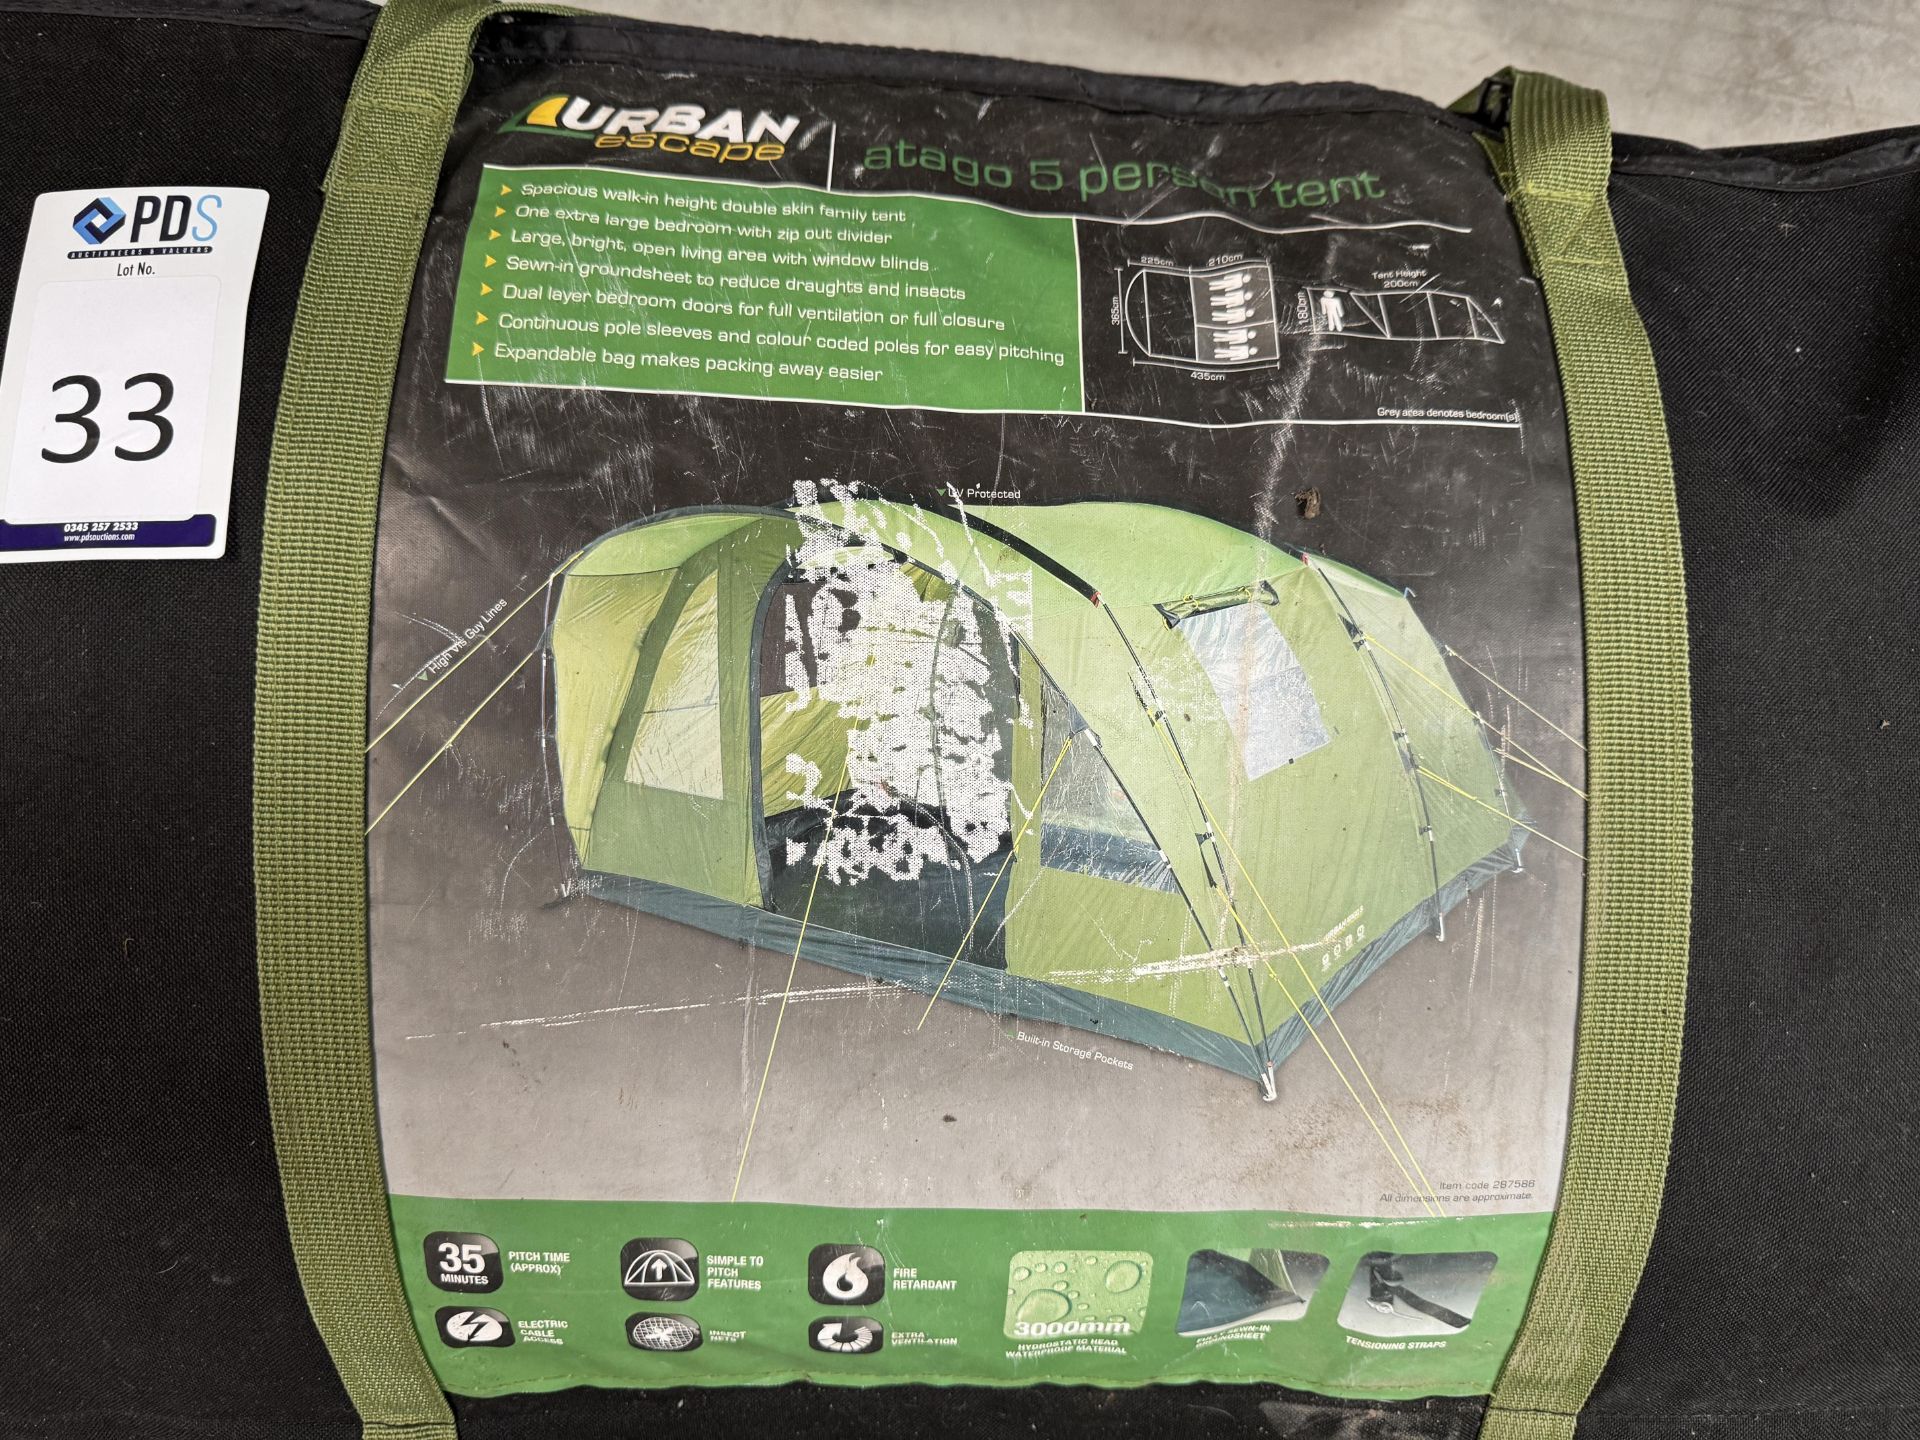 Urban Escape Atago 5 Person Tent (Location: Brentwood. Please Refer to General Notes) - Image 2 of 3